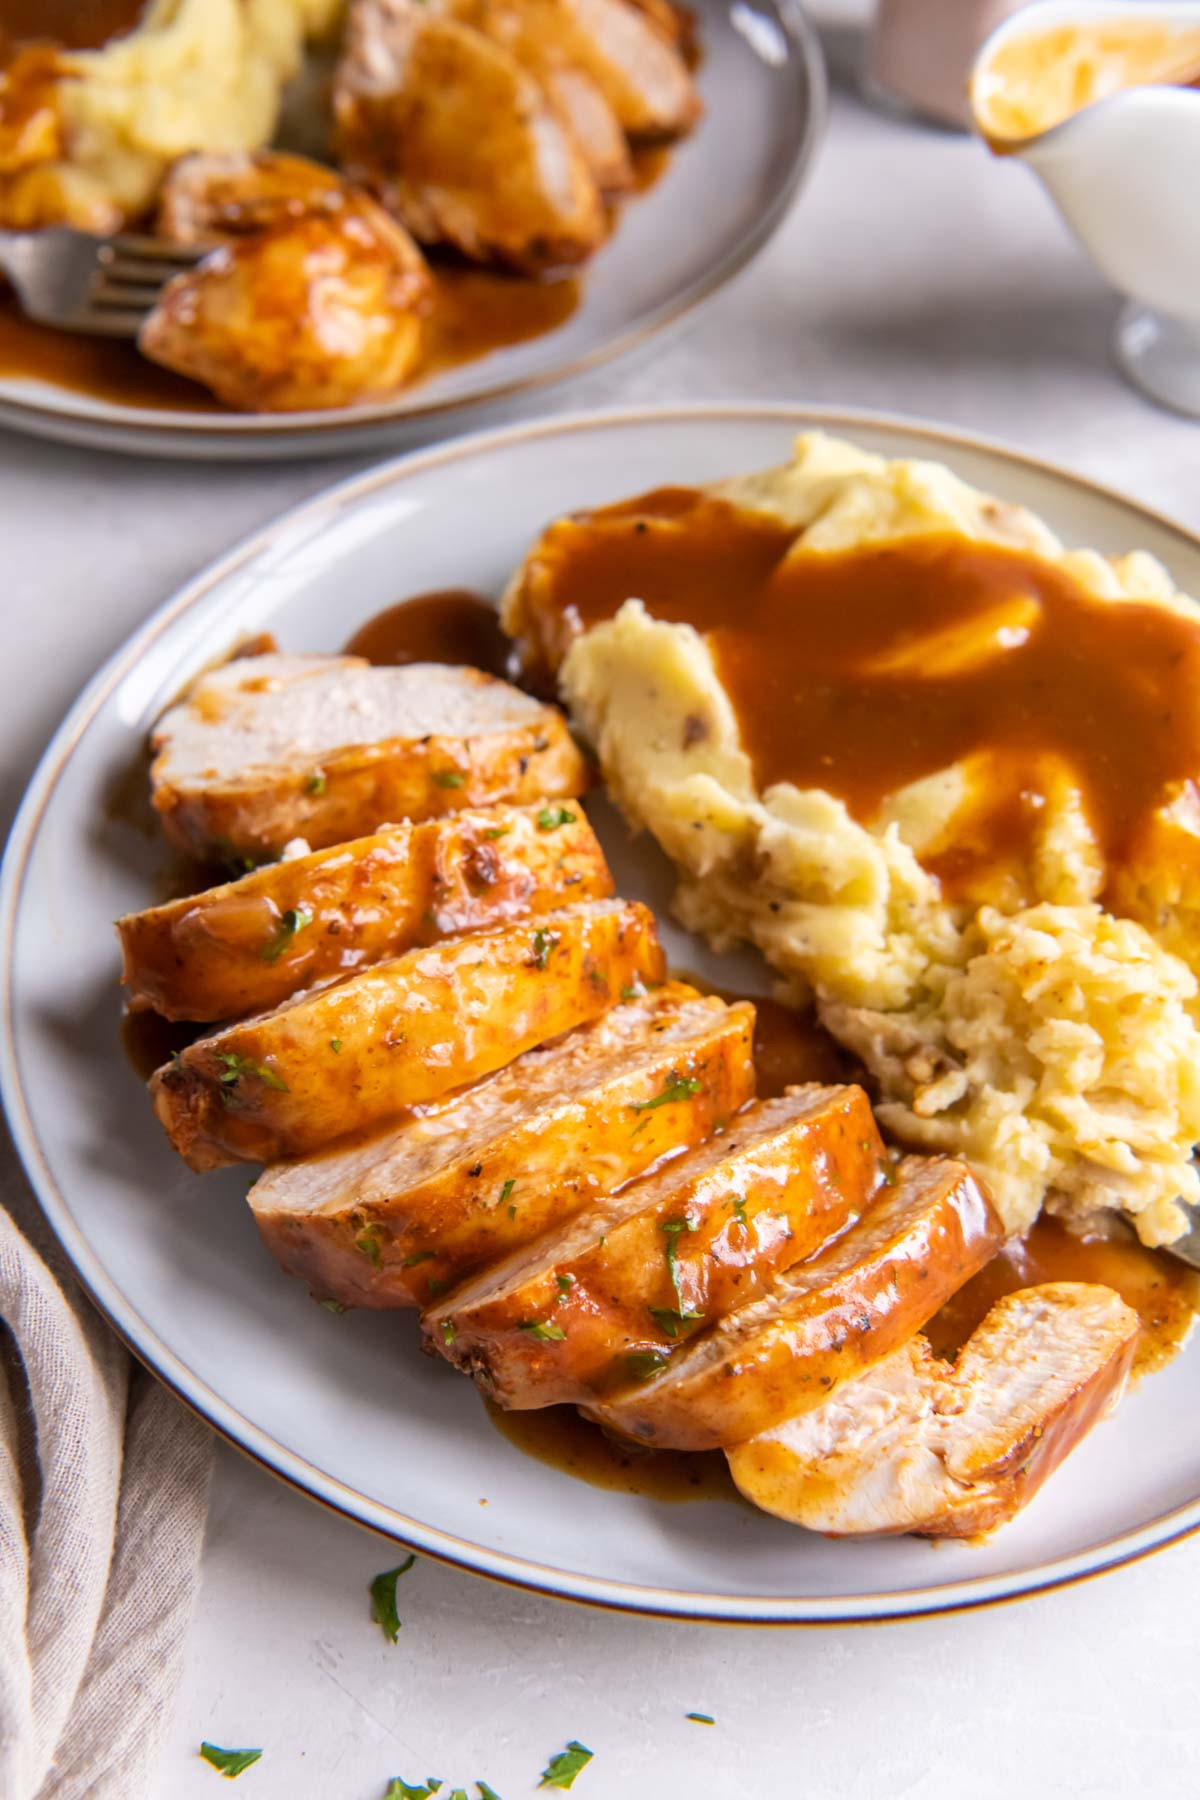 Sliced instant pot chicken breast served with gravy and mashed potatoes.